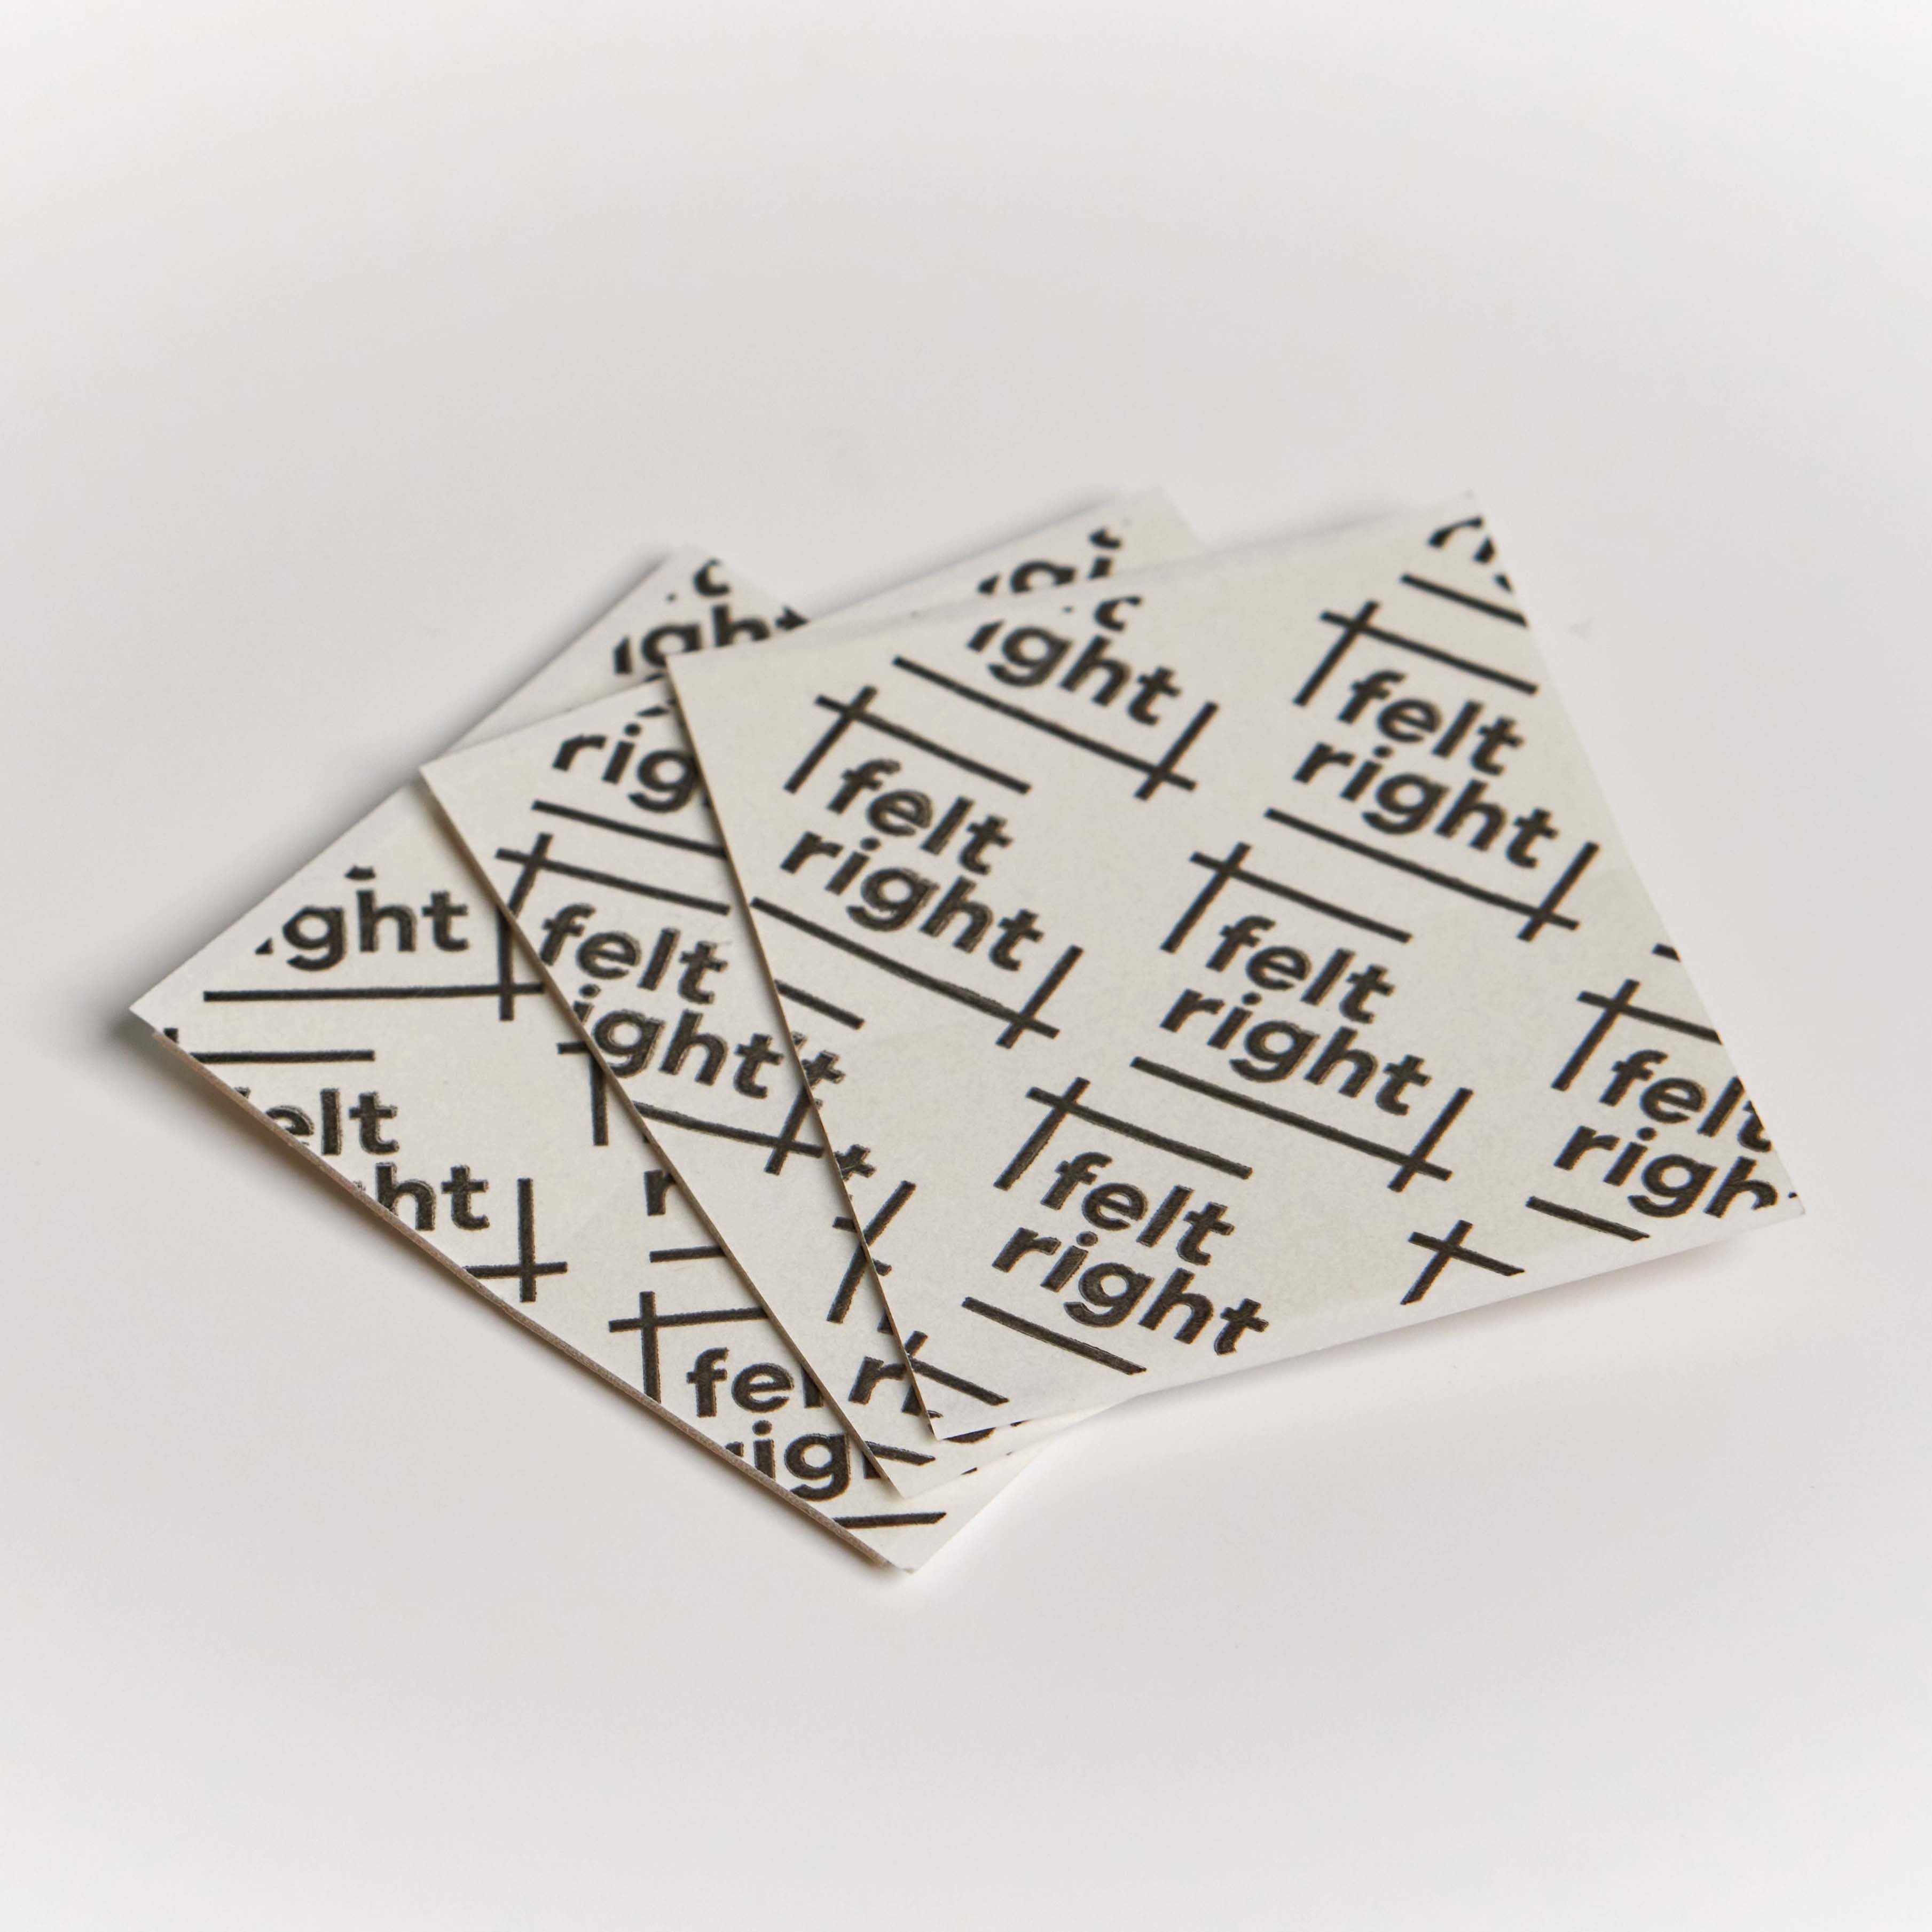 NEW! Felt Right Paint-Safe Adhesive Pack (Pack of 10)